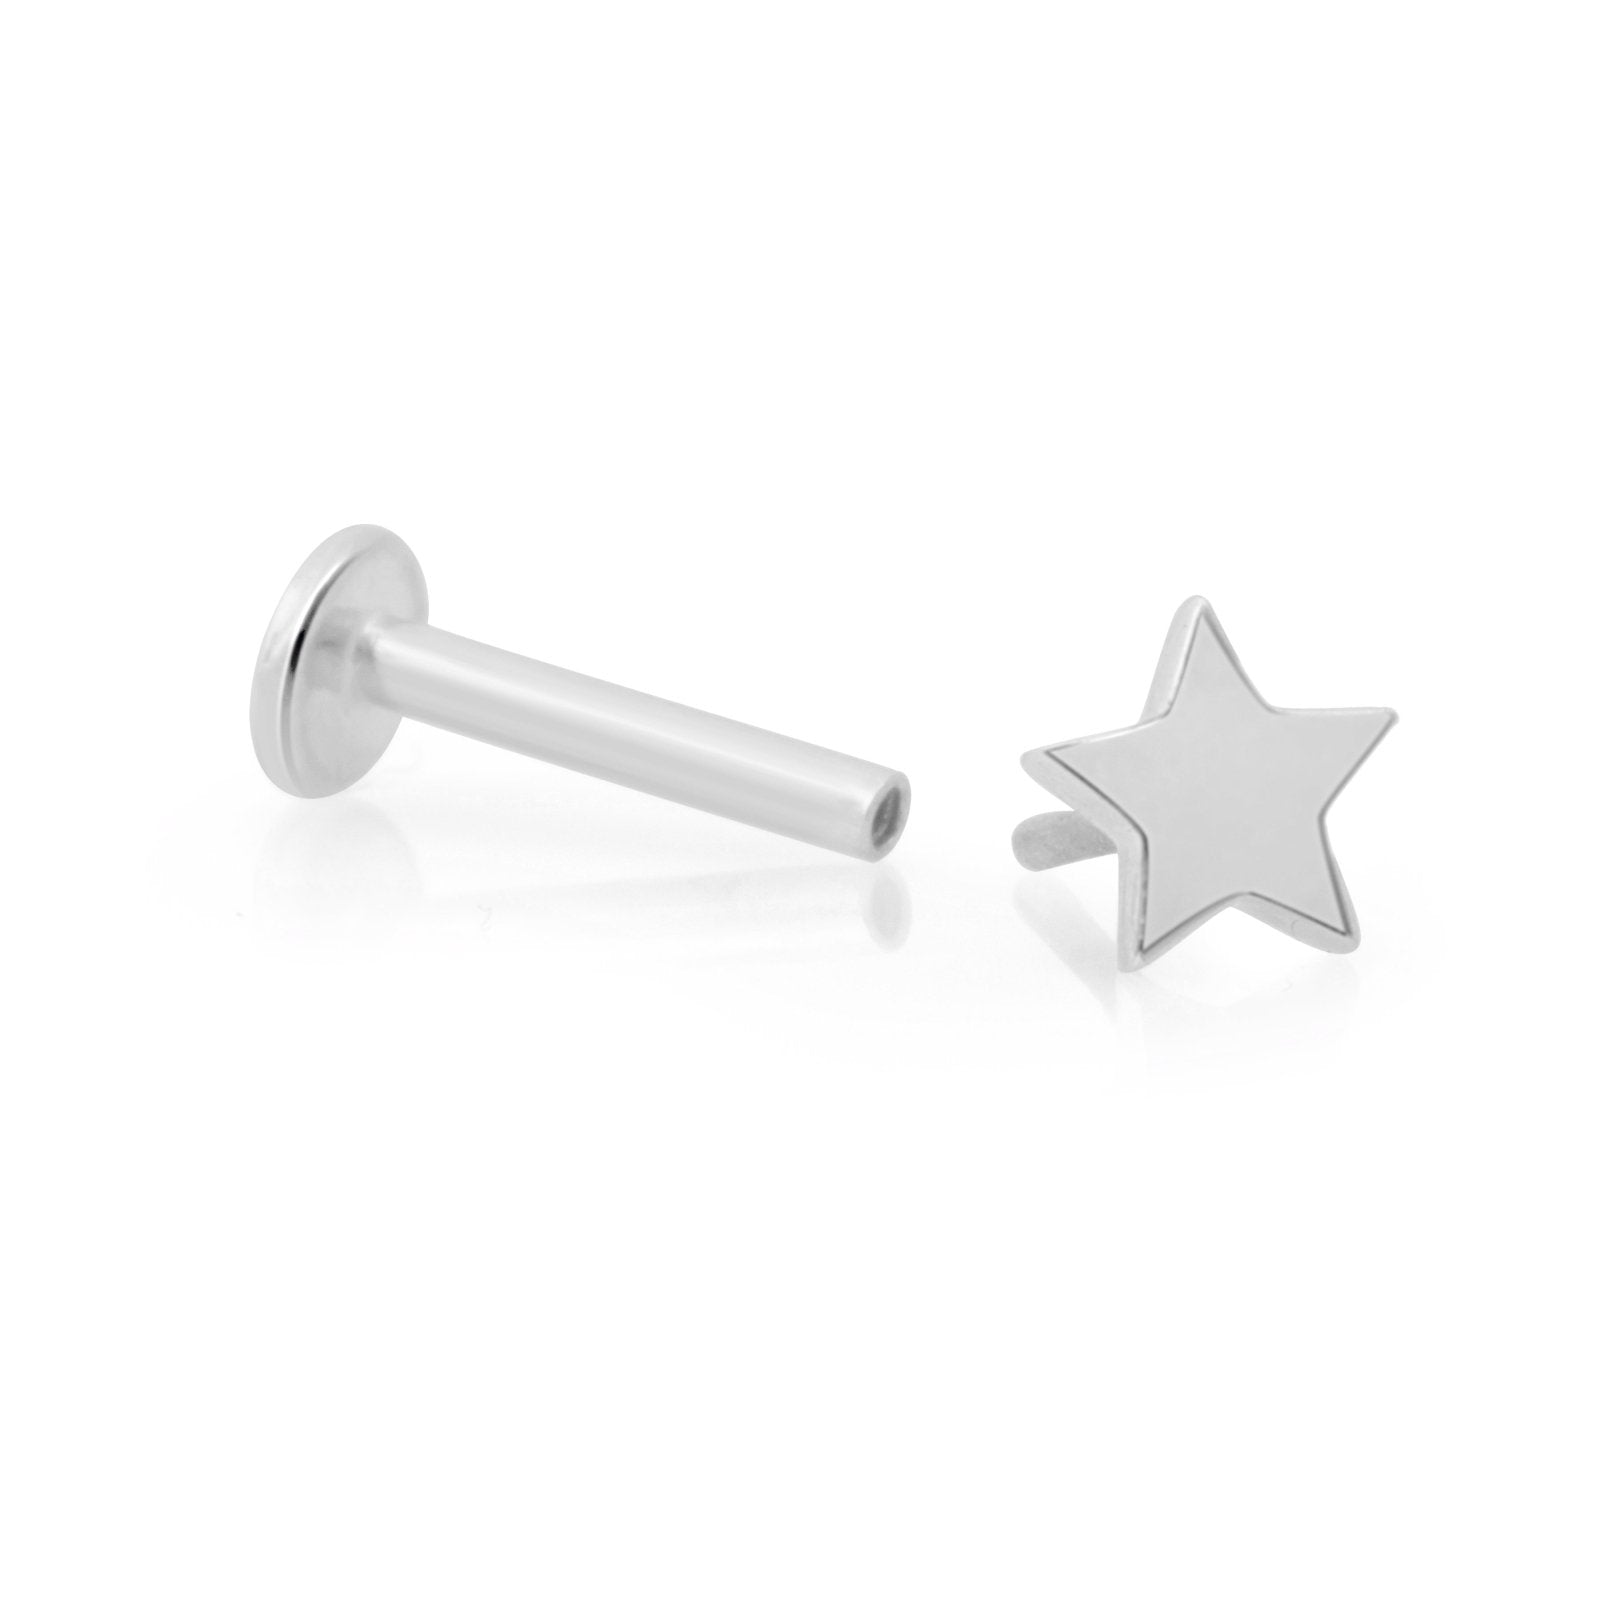 White Gold Star Flat Back Stud, 4mm Earrings Estella Collection #product_description# 18282 14k Cartilage Earring Cartilage Earrings #tag4# #tag5# #tag6# #tag7# #tag8# #tag9# #tag10# 5MM